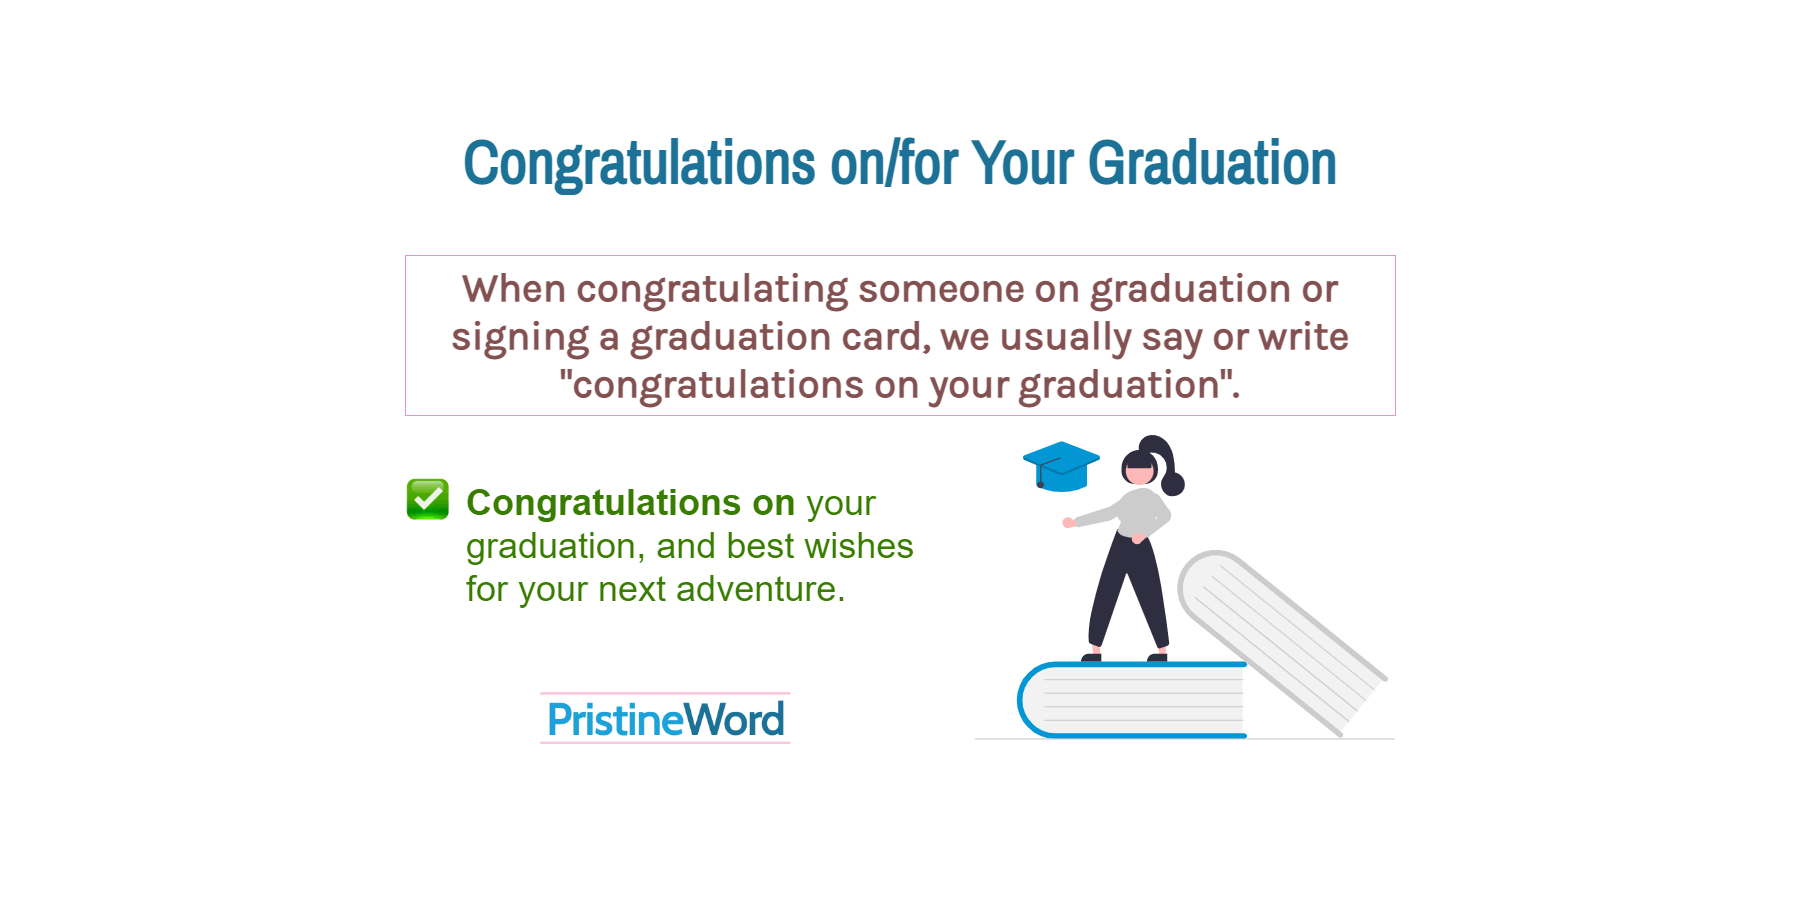 Congratulations on/for Your Graduation (Prepositions)